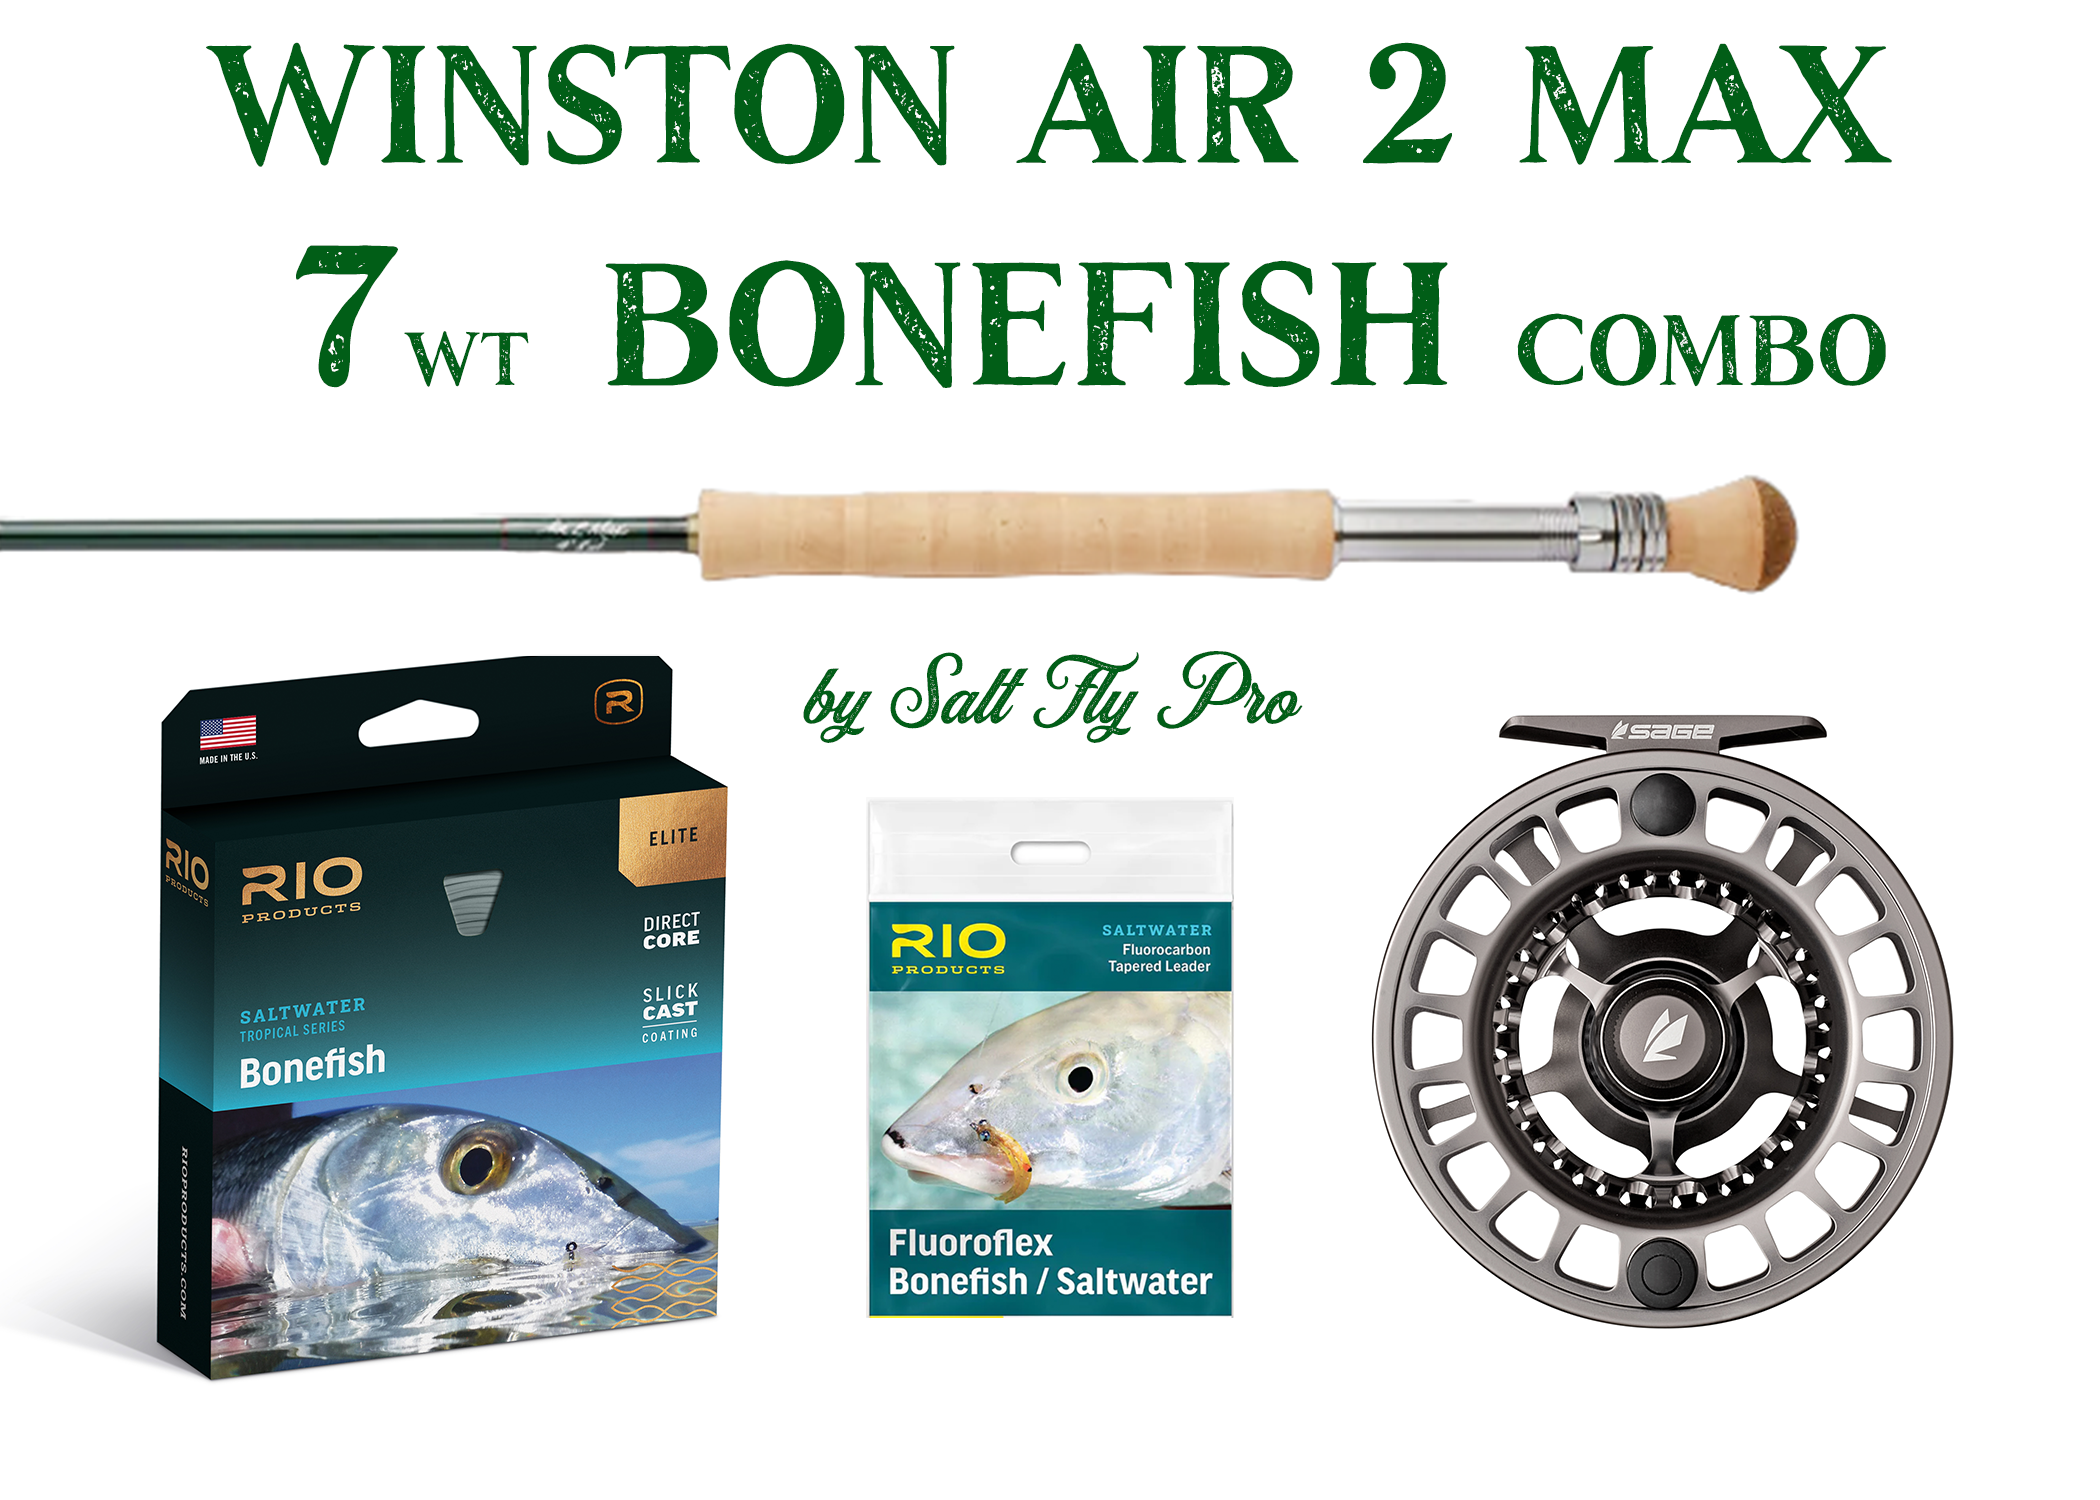 Winston AIR 2 6wt Fly Rod Combo Outfit with Reel & Line - NEW!